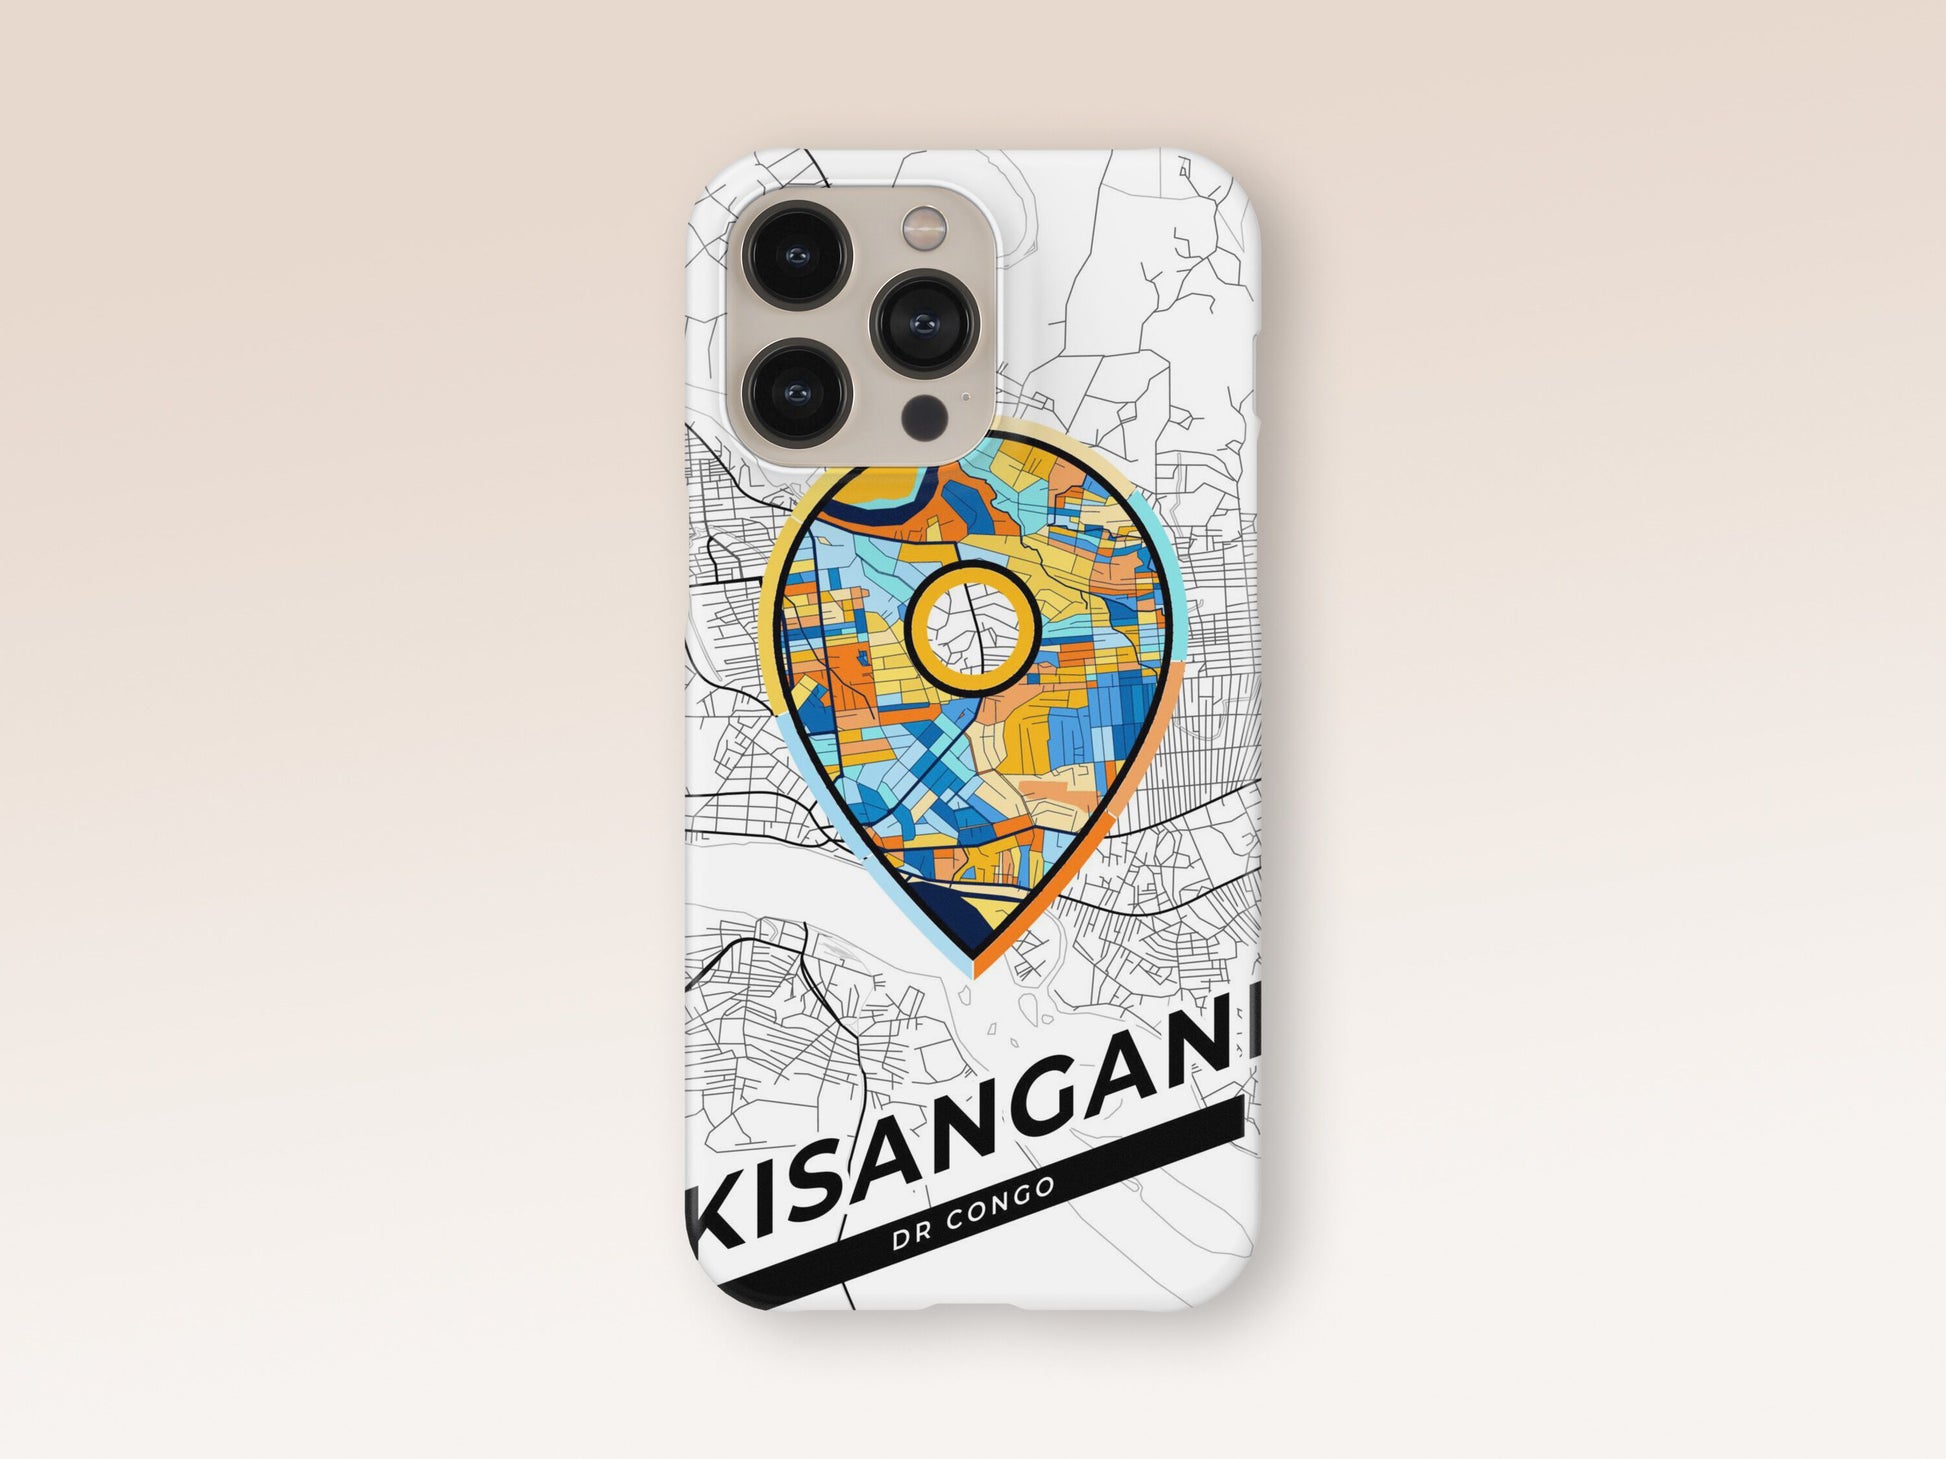 Kisangani Dr Congo slim phone case with colorful icon. Birthday, wedding or housewarming gift. Couple match cases. 1